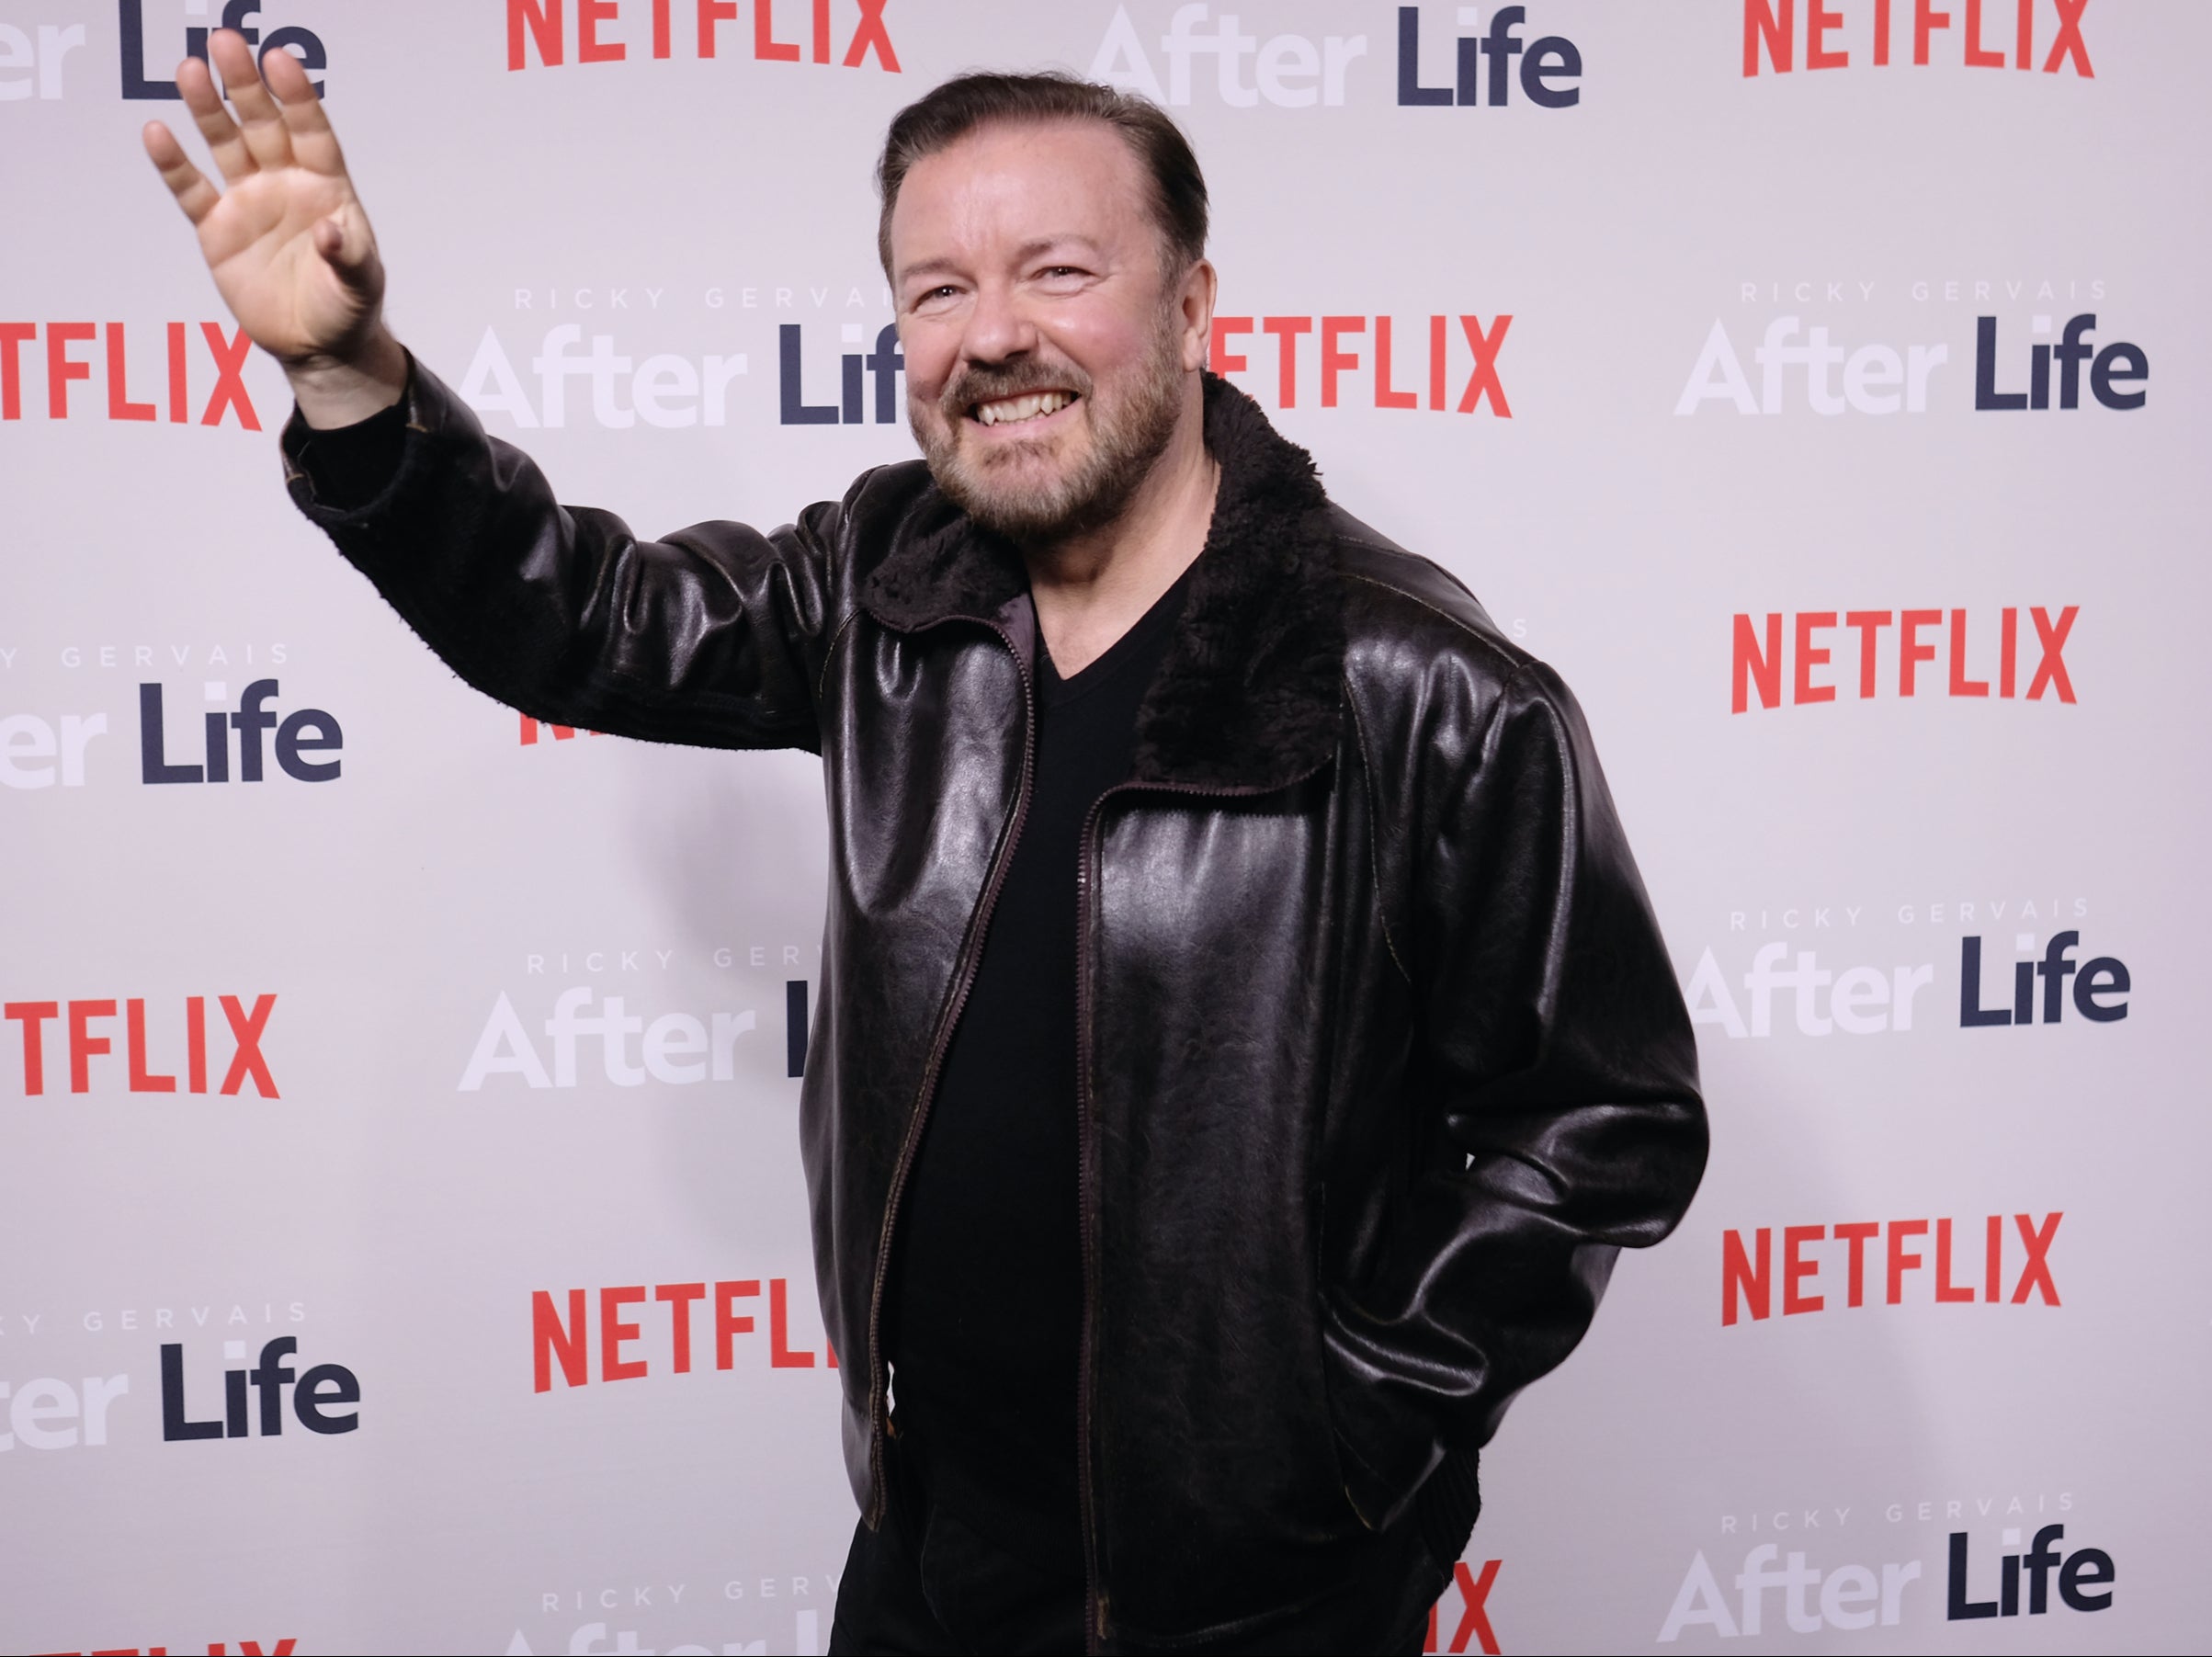 Ricky Gervais at an event for his Netflix show, After Life